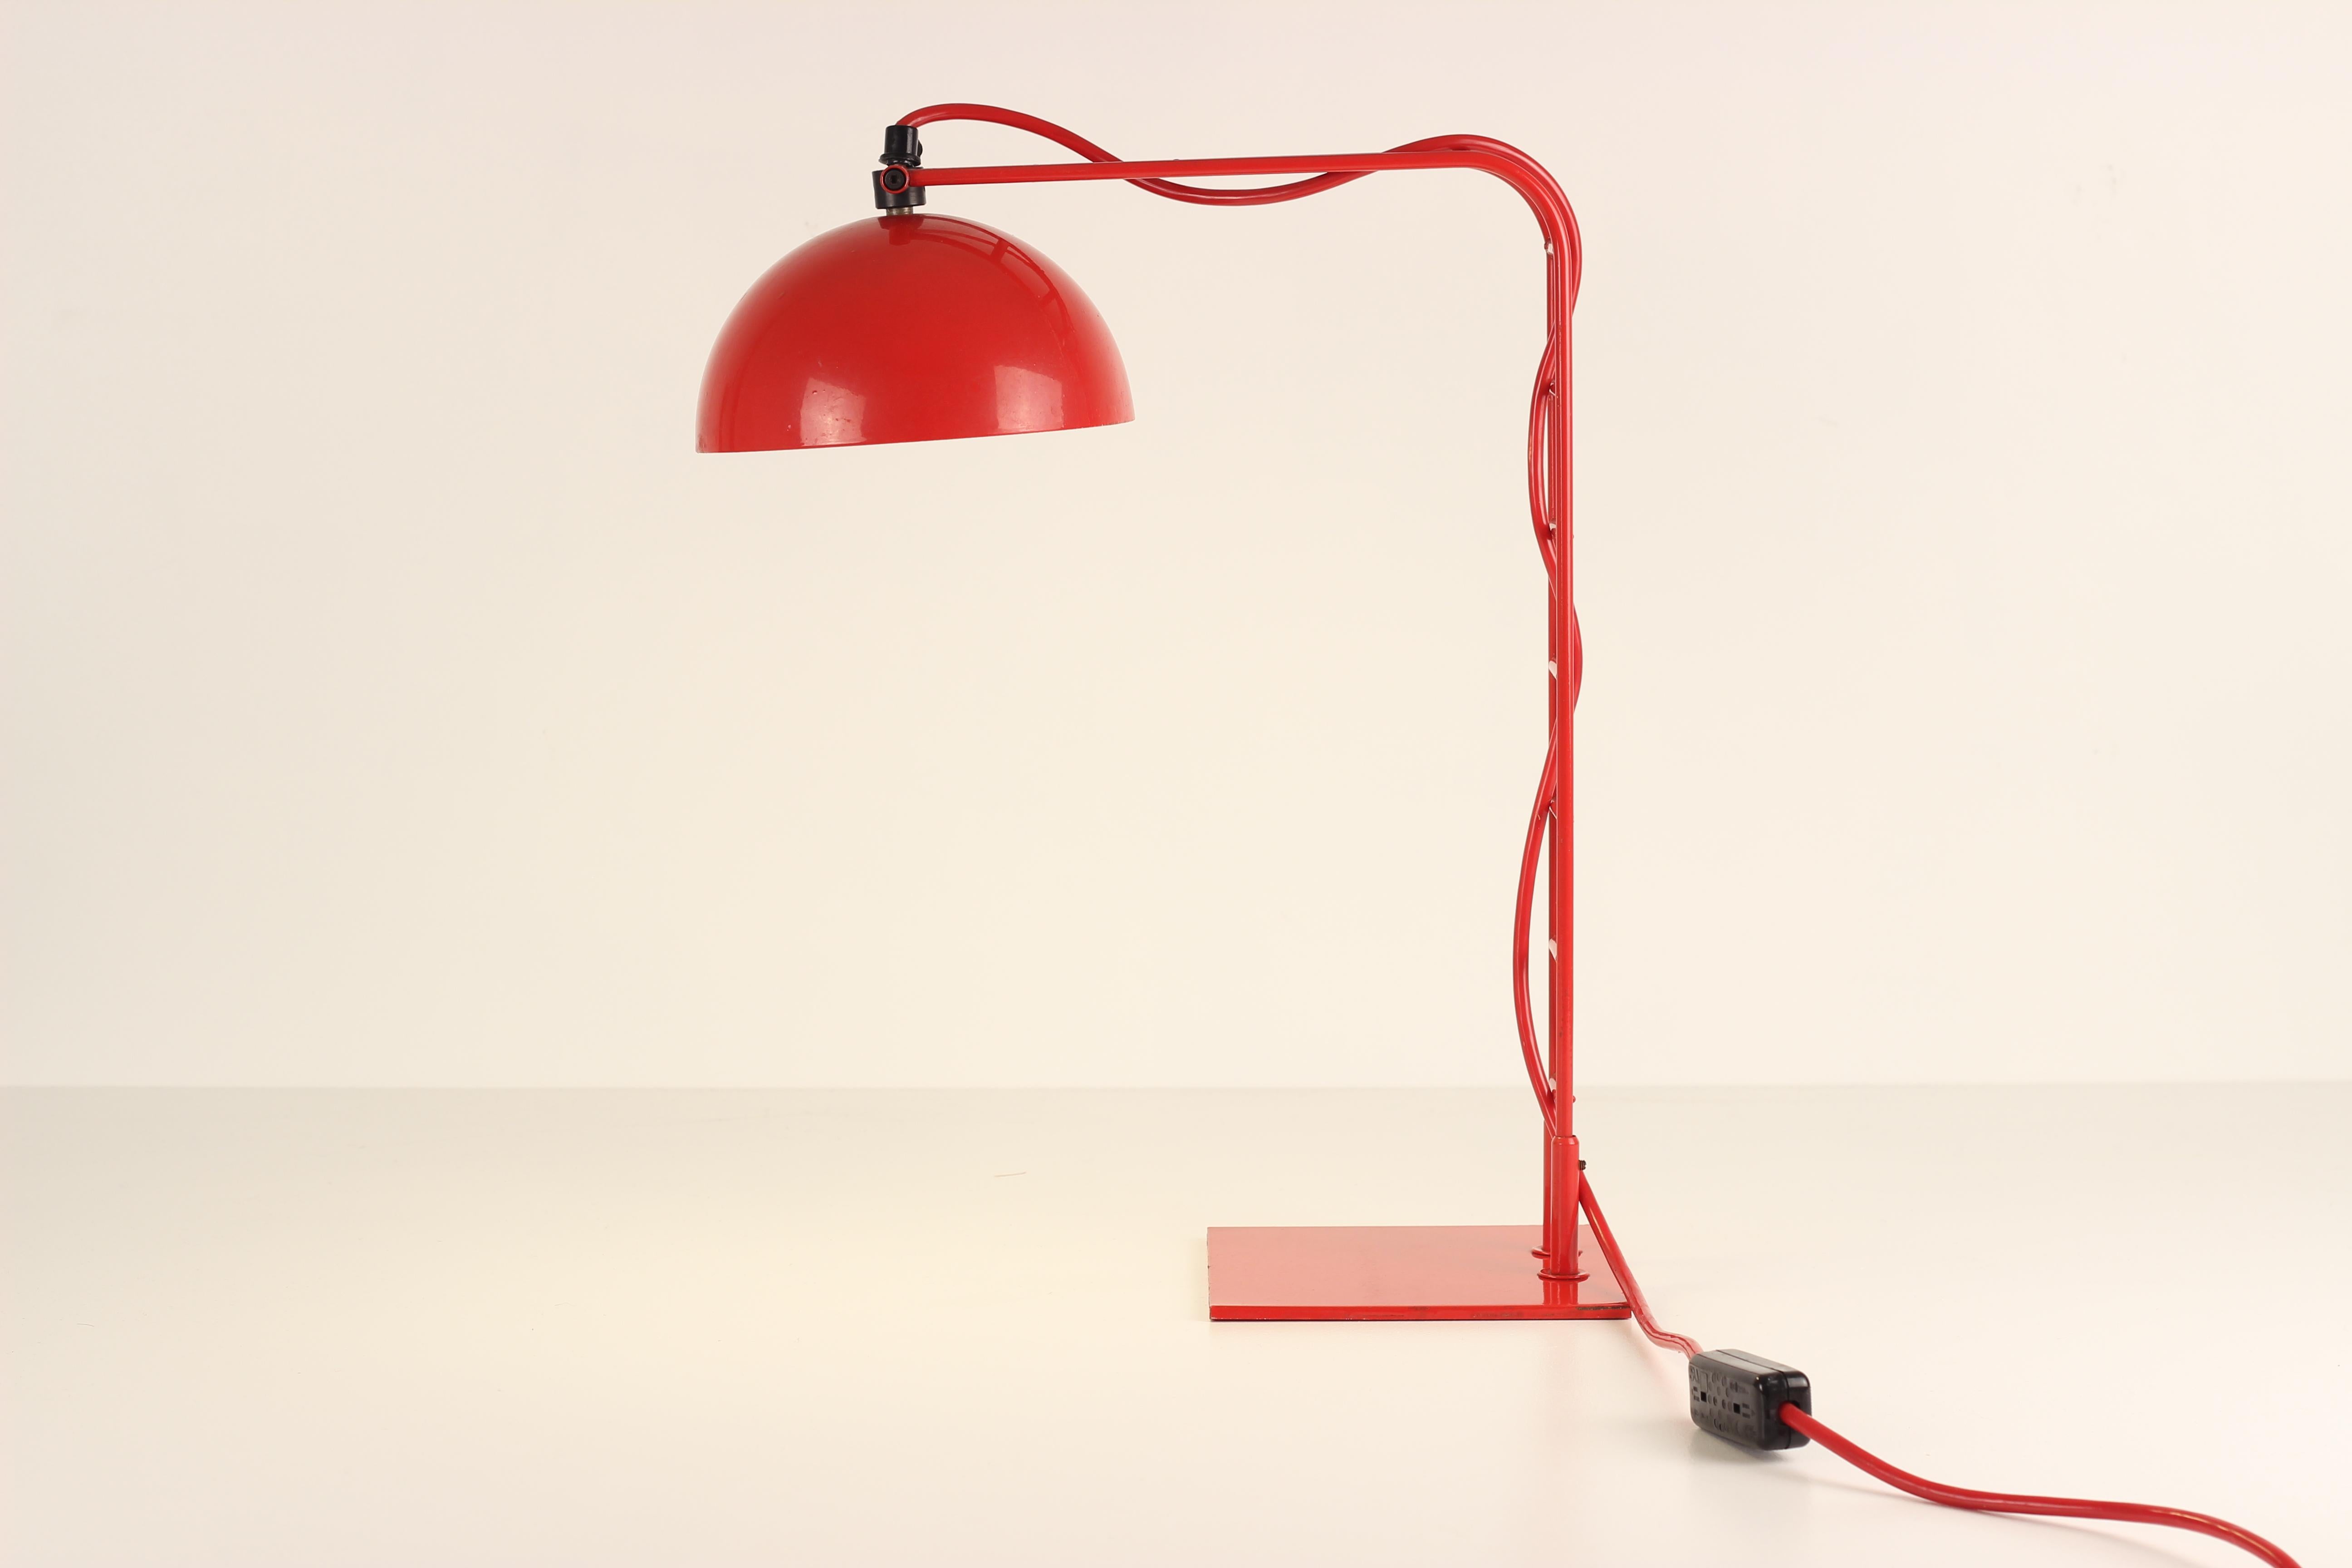 A Space Age Red ladder Desk light from the estate of the late Lady Wanda Boothby, the wife of Conservative peer, Lord Robert Boothby 
(1900-86). Robert John Graham Boothby, Baron Boothby, KBE (12 February 1900 – 16 July 1986), often known as Bob